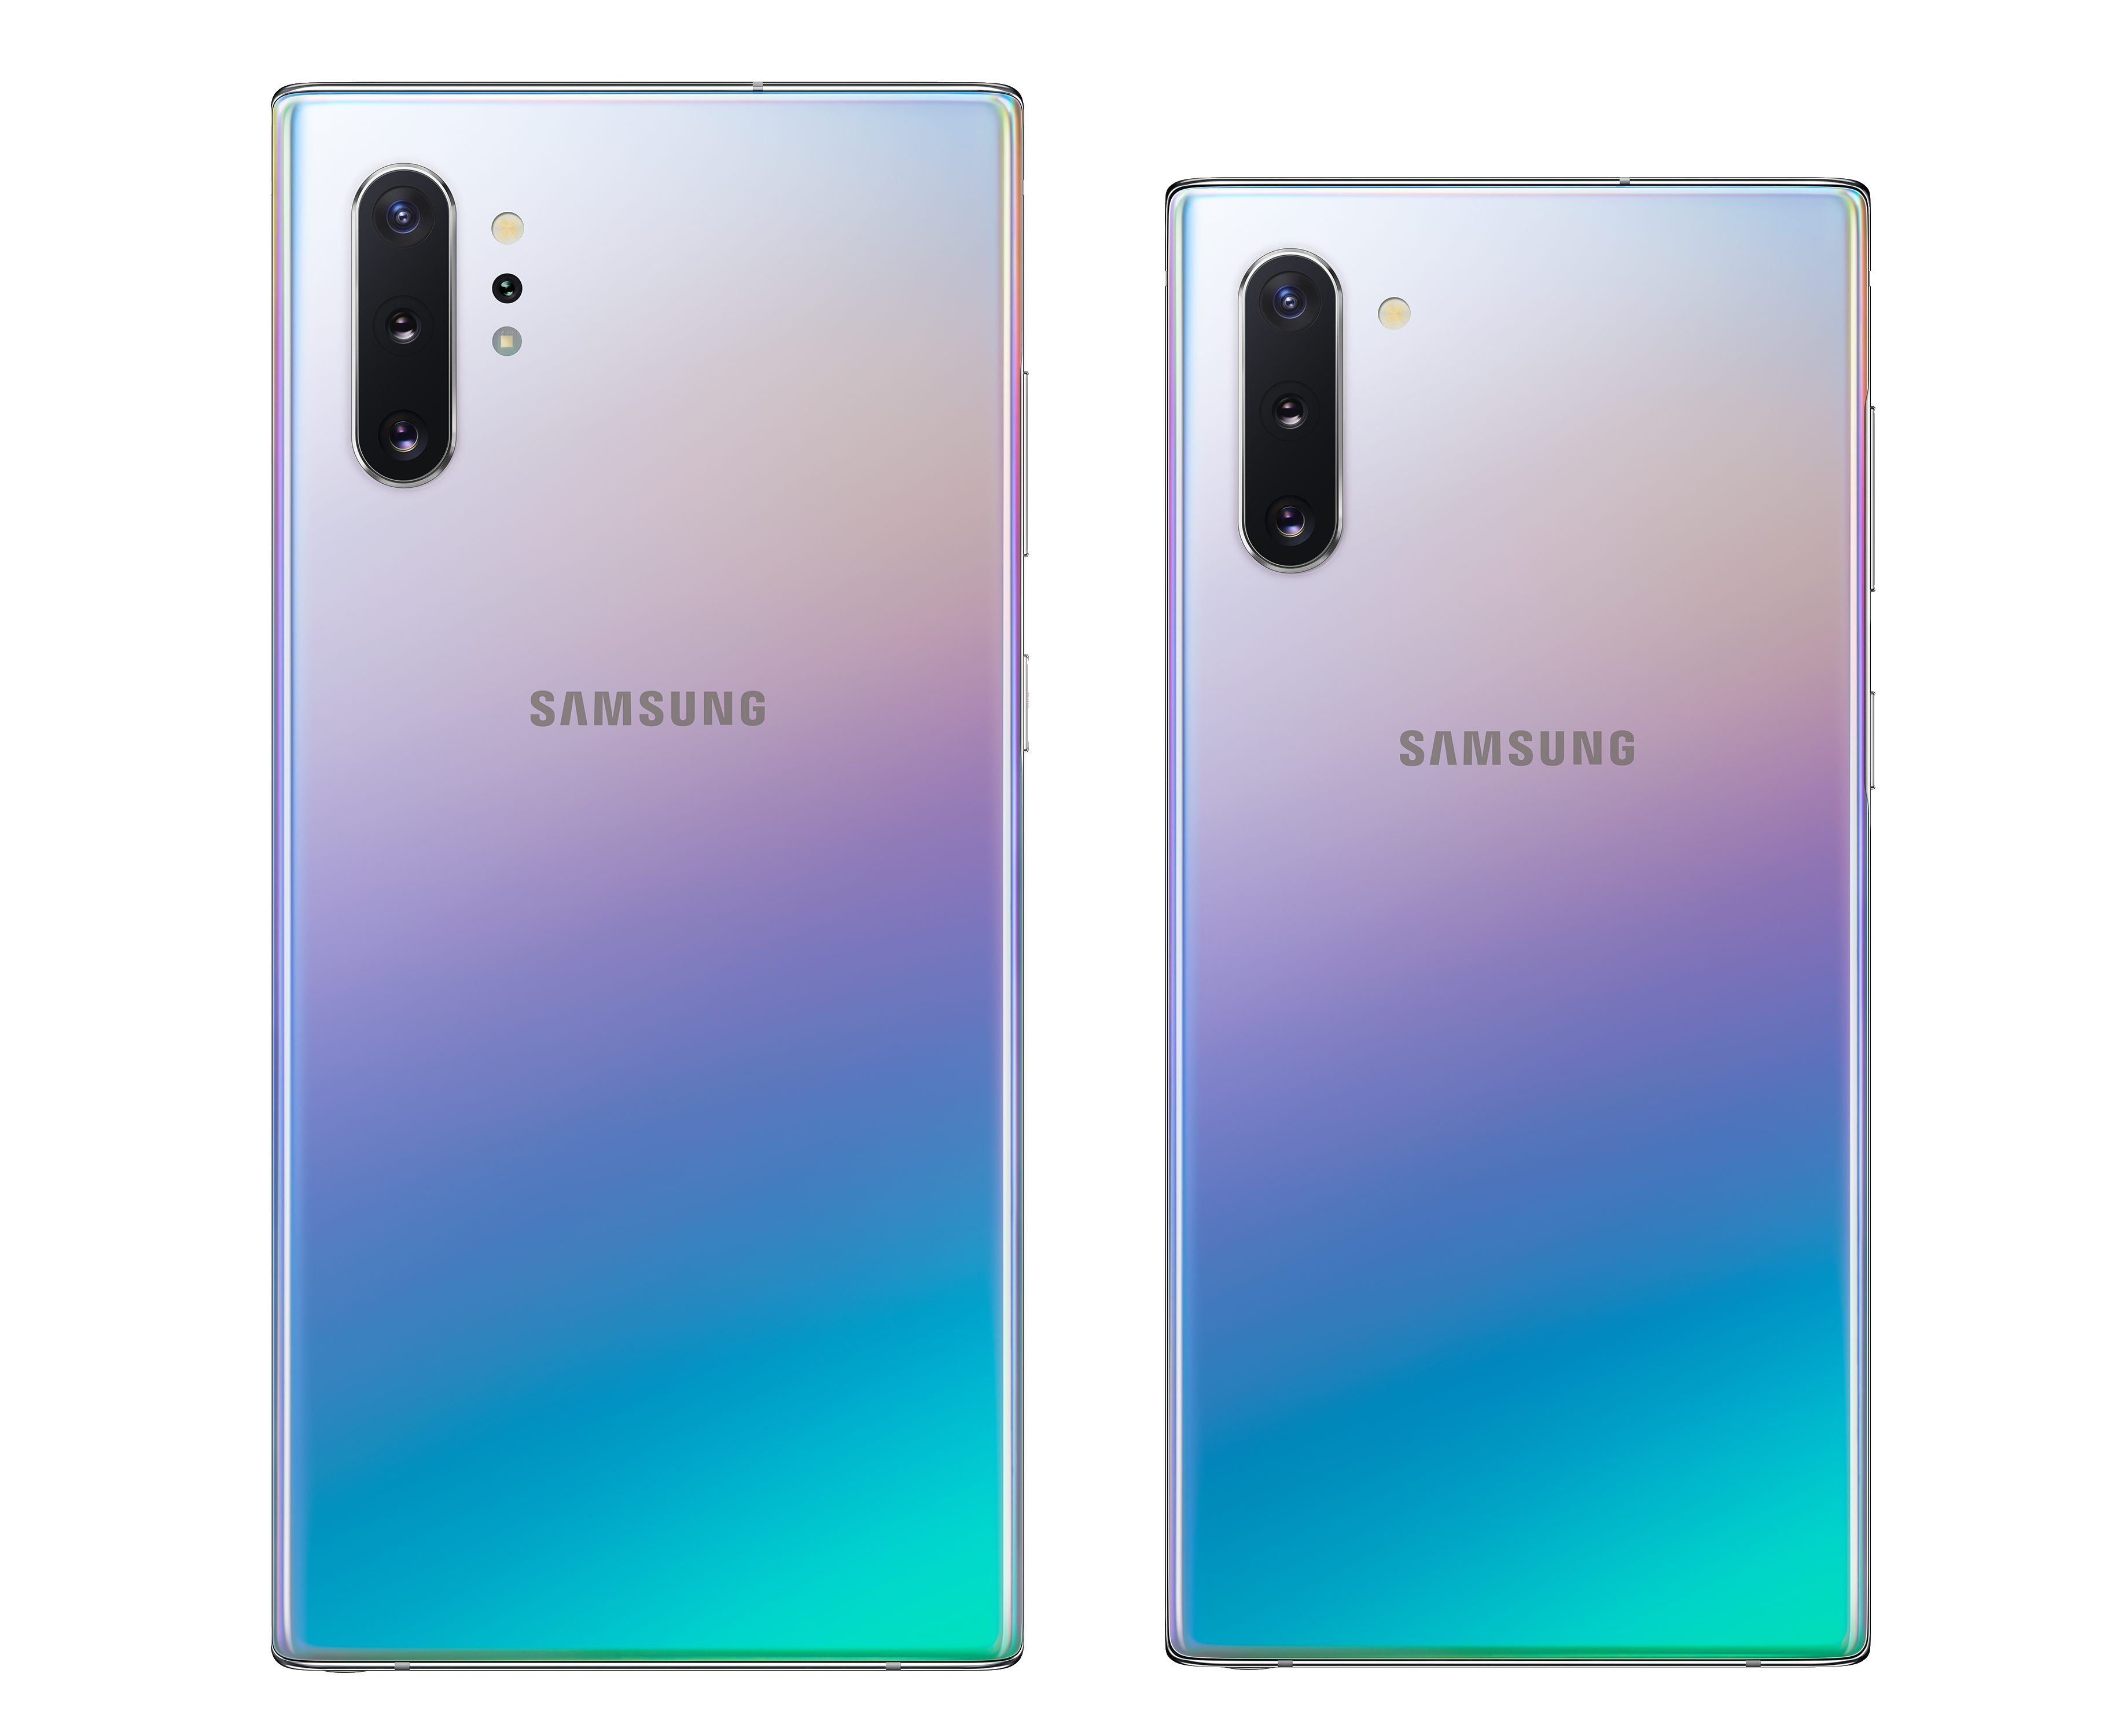 Samsung Announces Galaxy Note10 & Note10+: A Redesign With Feature